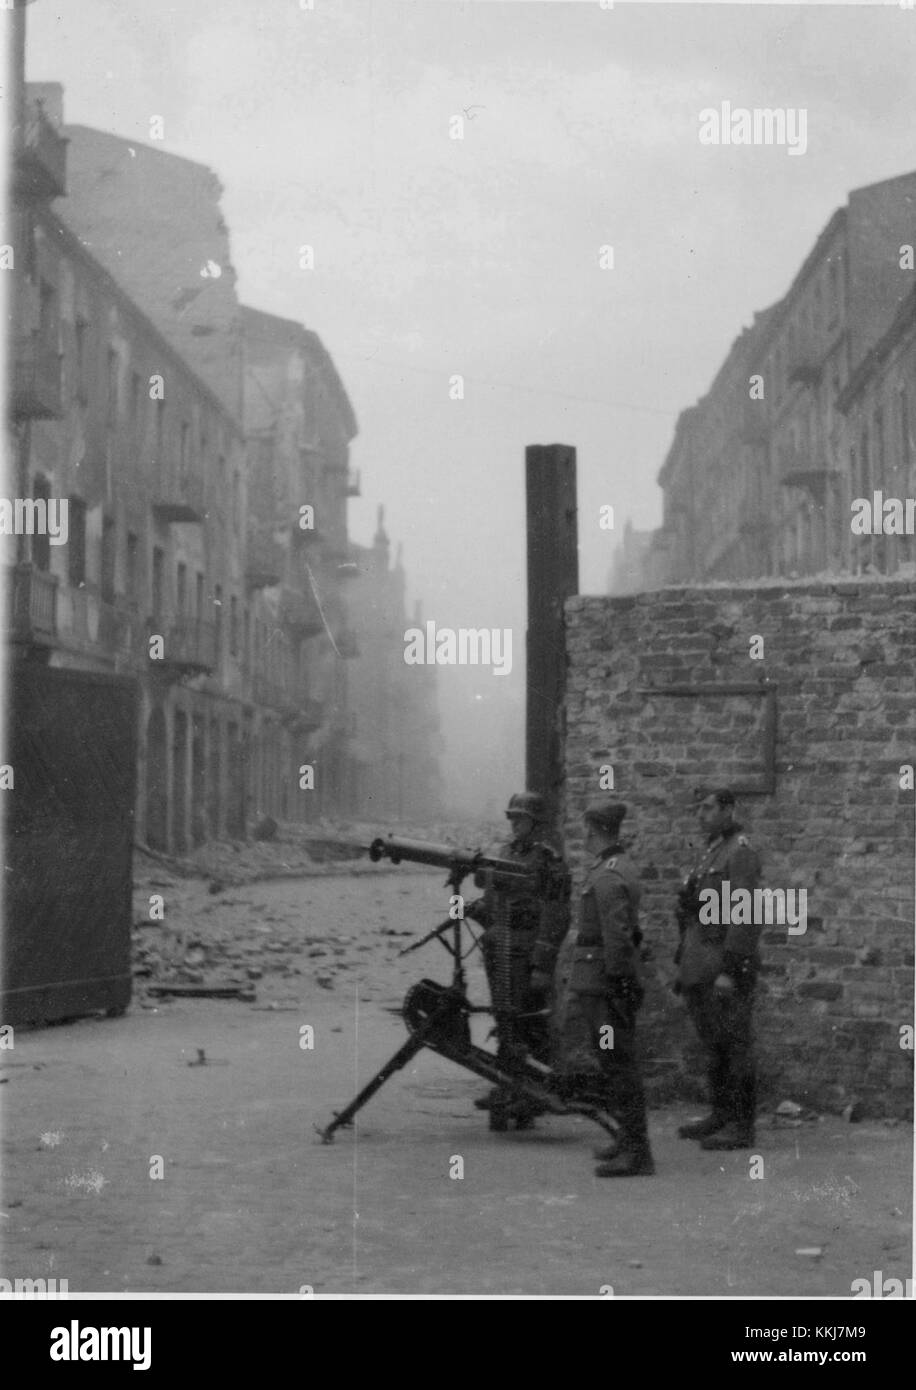 Stroop Report 2/4 Record Group 038 United States Counsel for the Prosecution of Axis Criminality; United States Exhibits, 1933-46 HMS Asset Id: HF1-88454435 ReDiscovery Number: 06315 Warsaw ghetto uprising German sentries Stock Photo